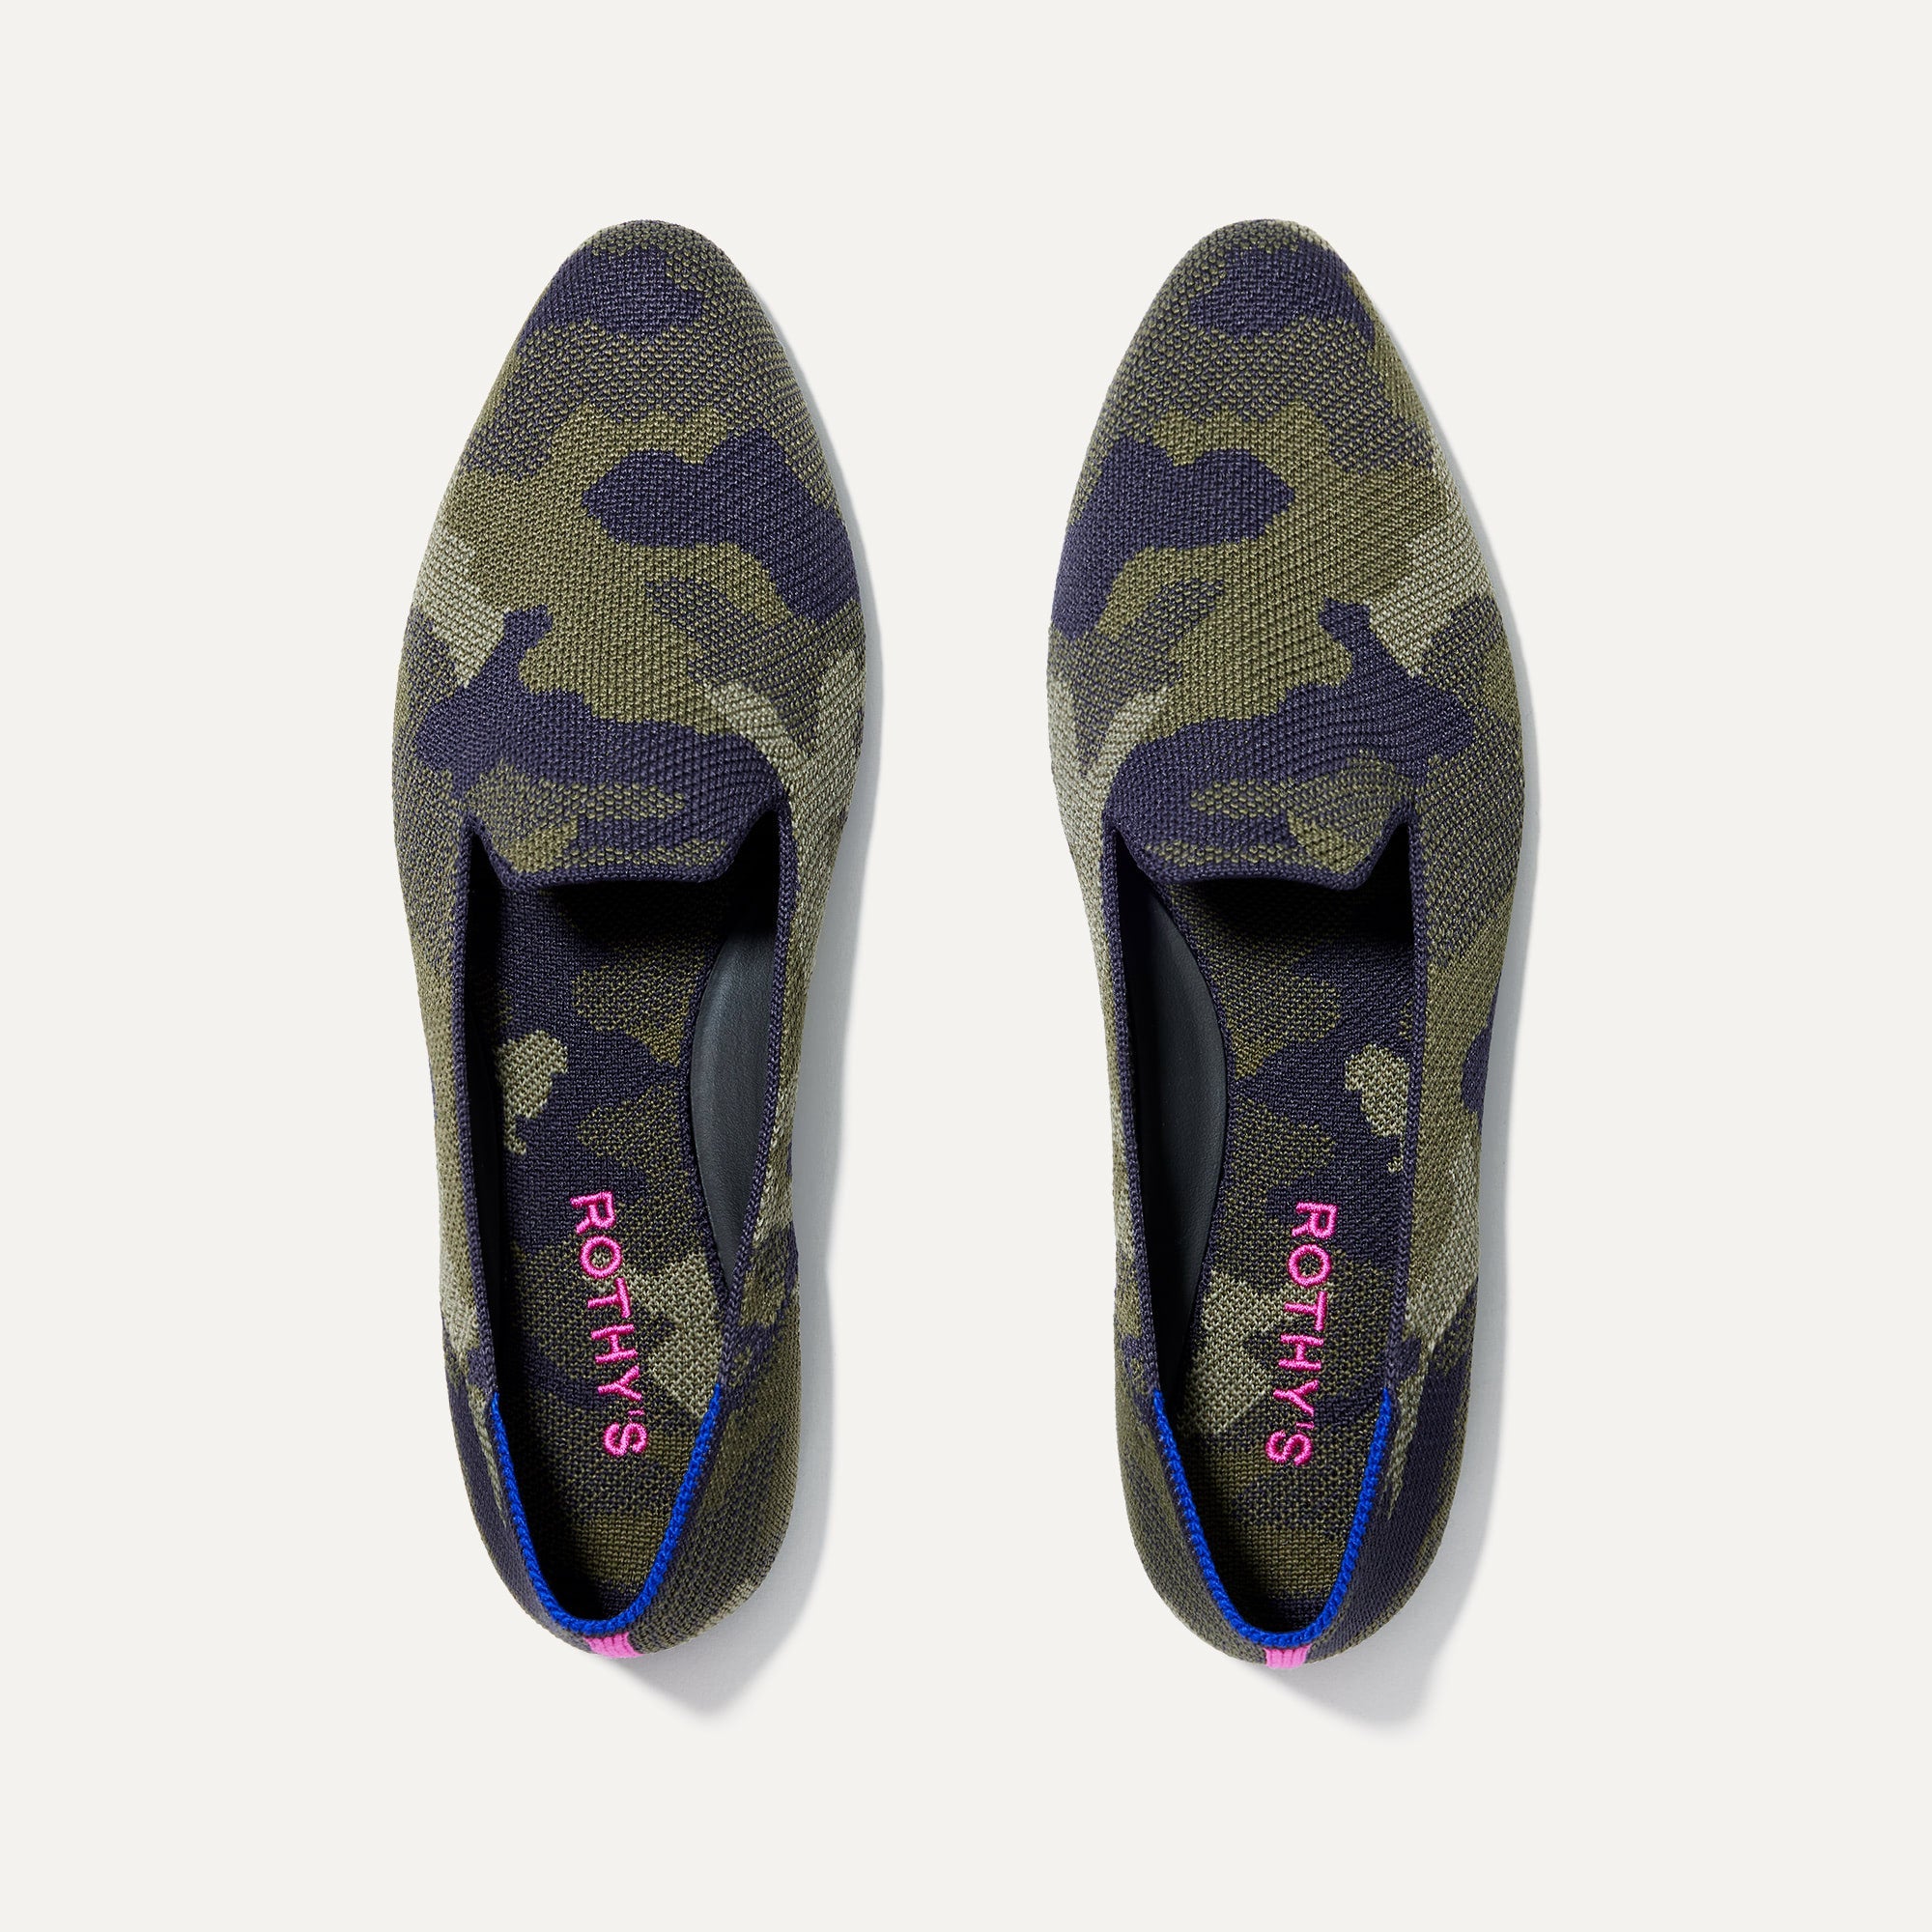 Almond Toe Penny Loafer in Spruce Camo | Women's Shoes | Rothy's